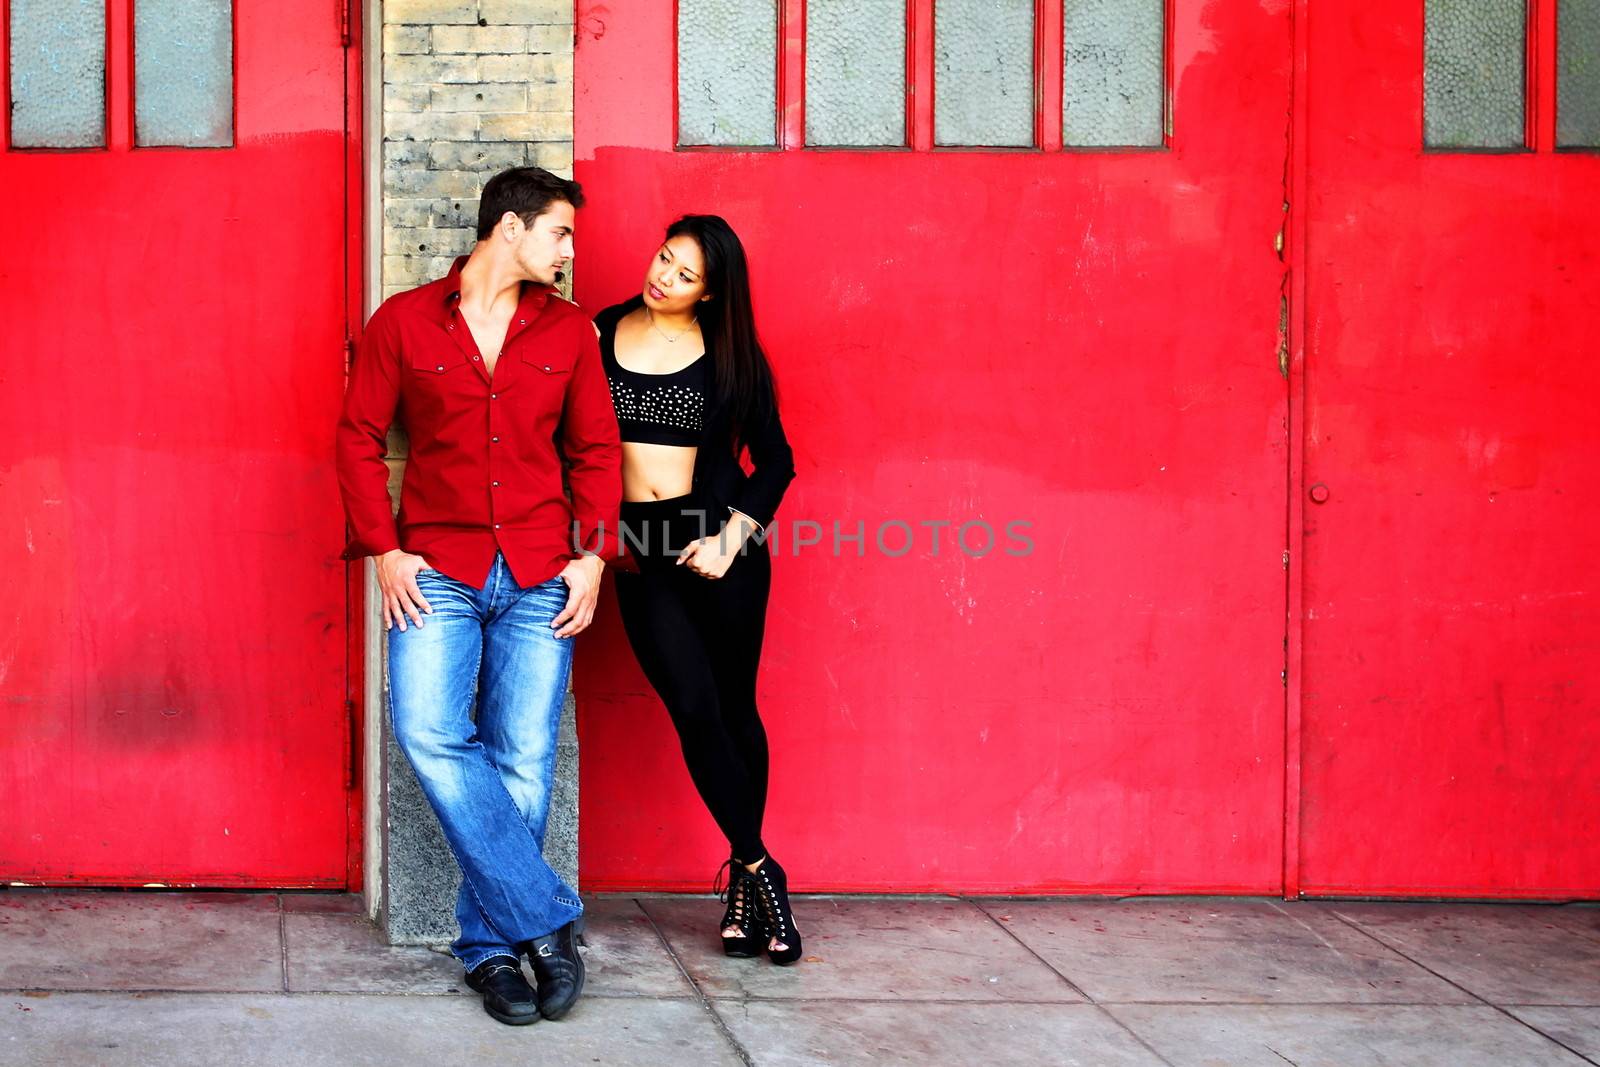 Young couple in front of red fire station doors.